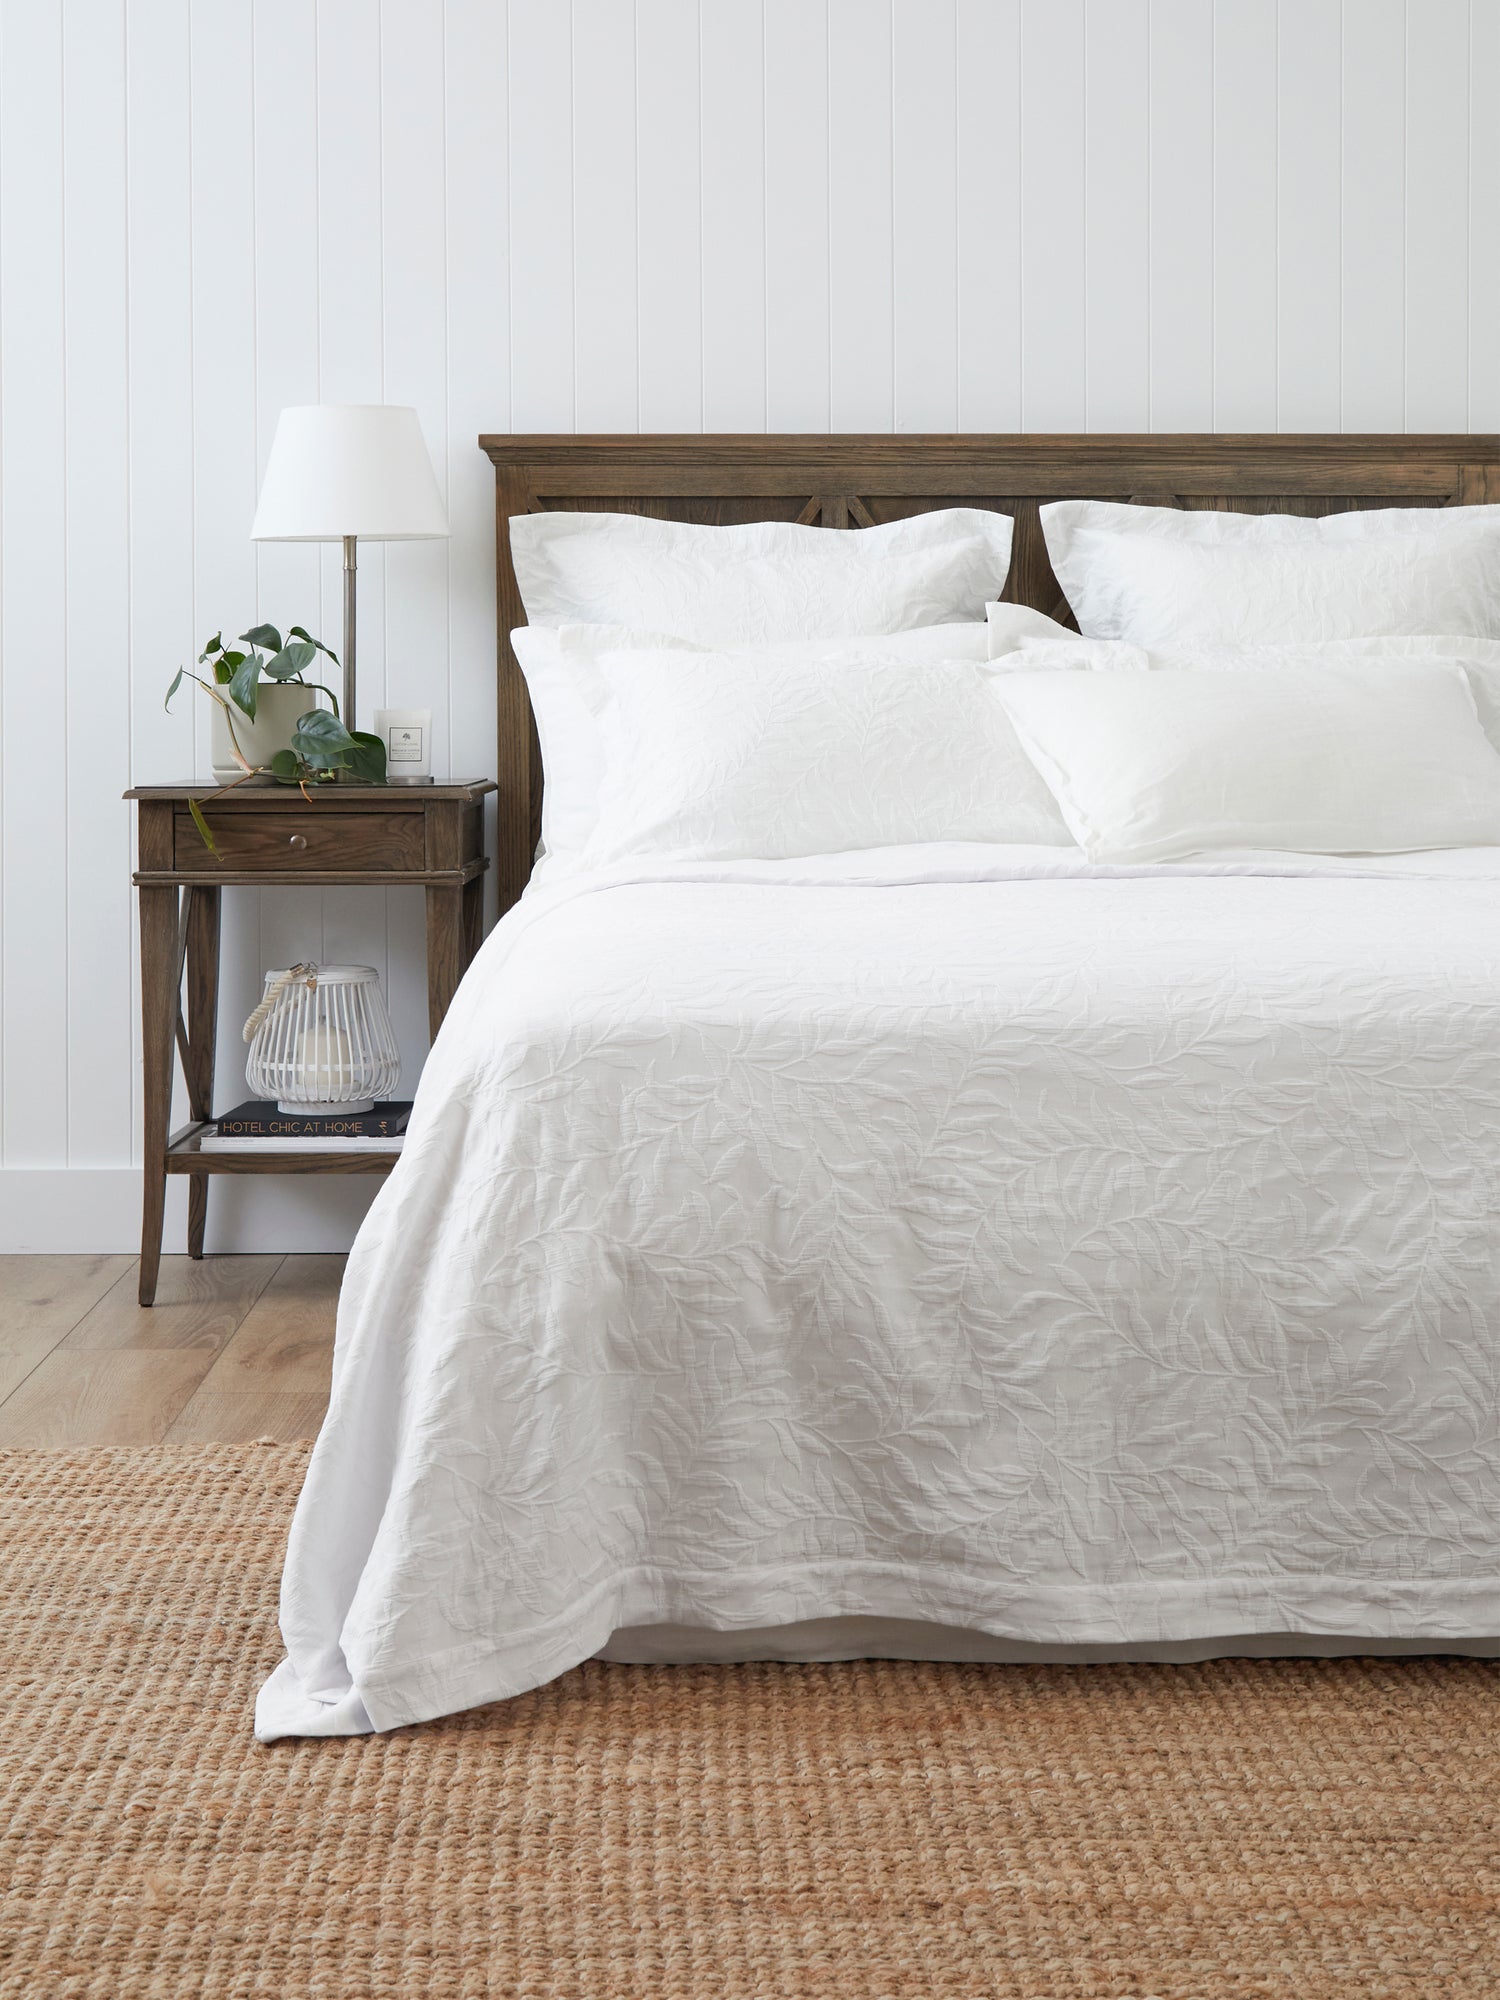 https://www.wallacecotton.com/content/products/laurel-bed-cover-white-1-9191.jpg?width=1500